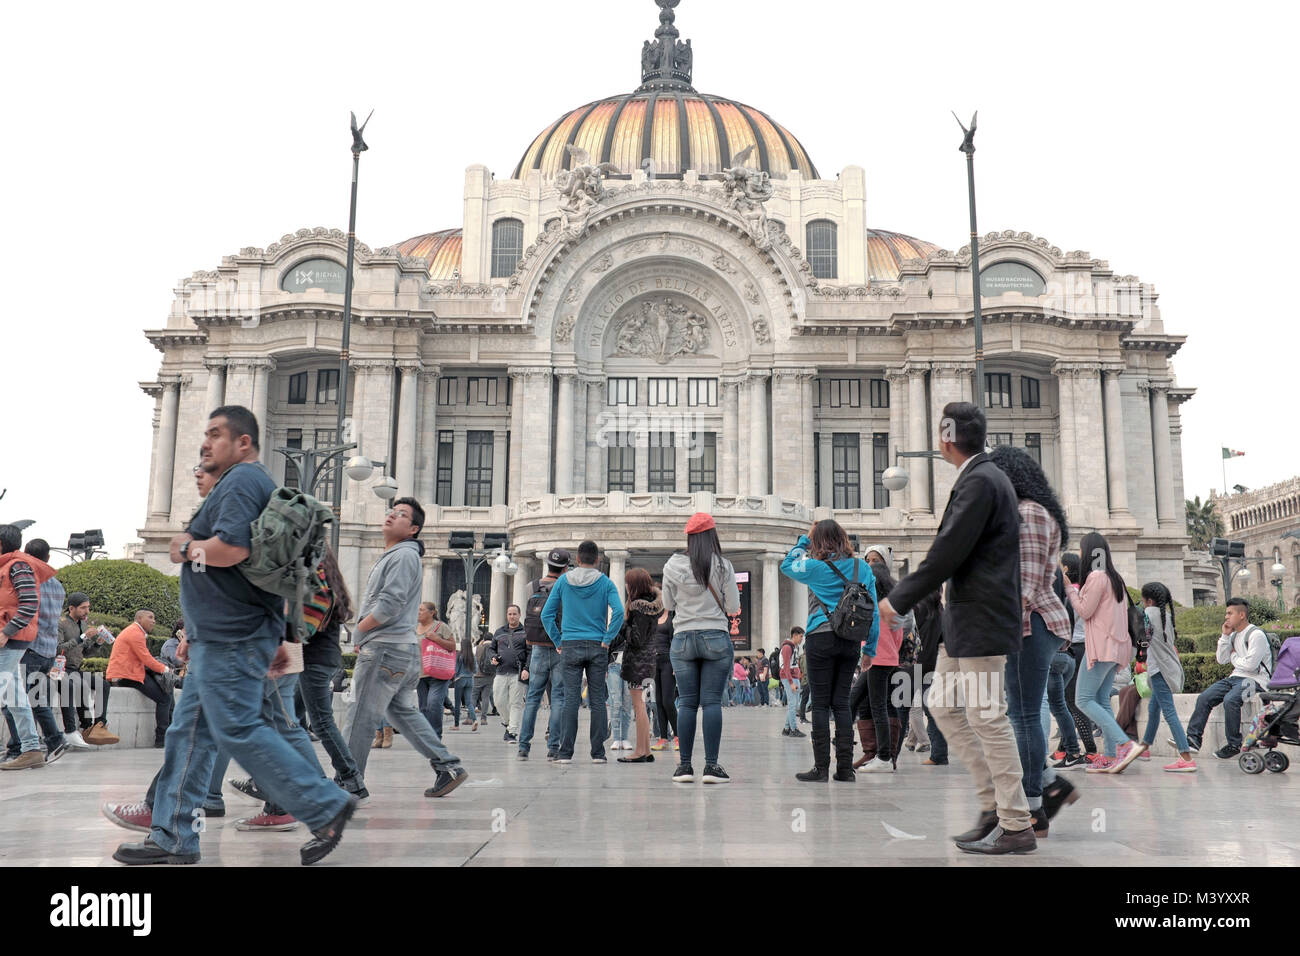 Crowds crossing paths in front of the Palacio de Bellas Artes, the cultural epicenter of the arts in Mexico City, Mexico. Stock Photo